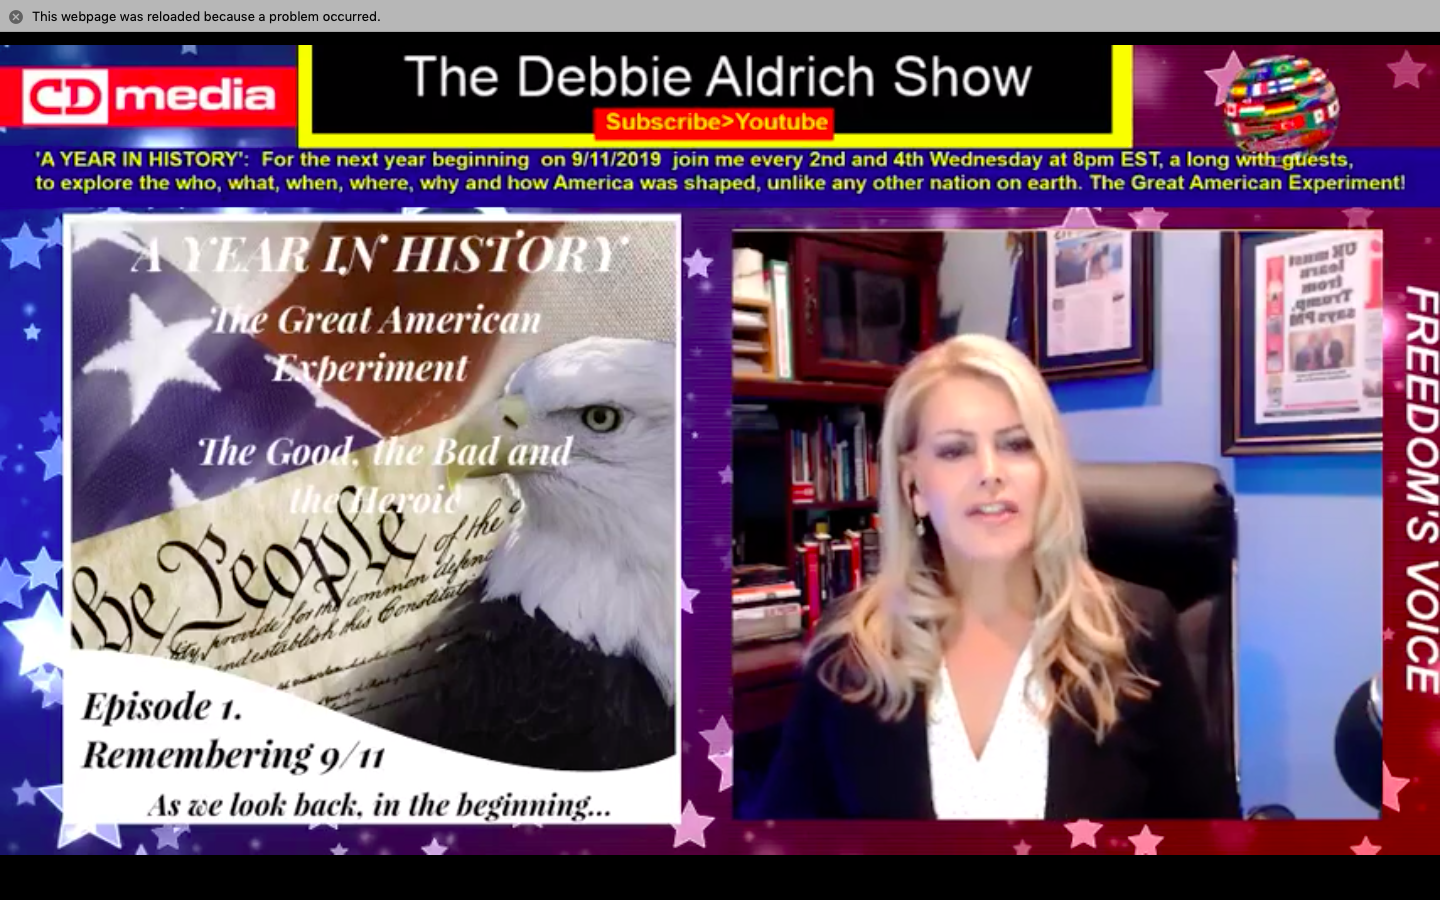 Debbie Aldrich Presents 'A Year In History: The Good The Bad and The Heroic' episode 1. In the Beginning...